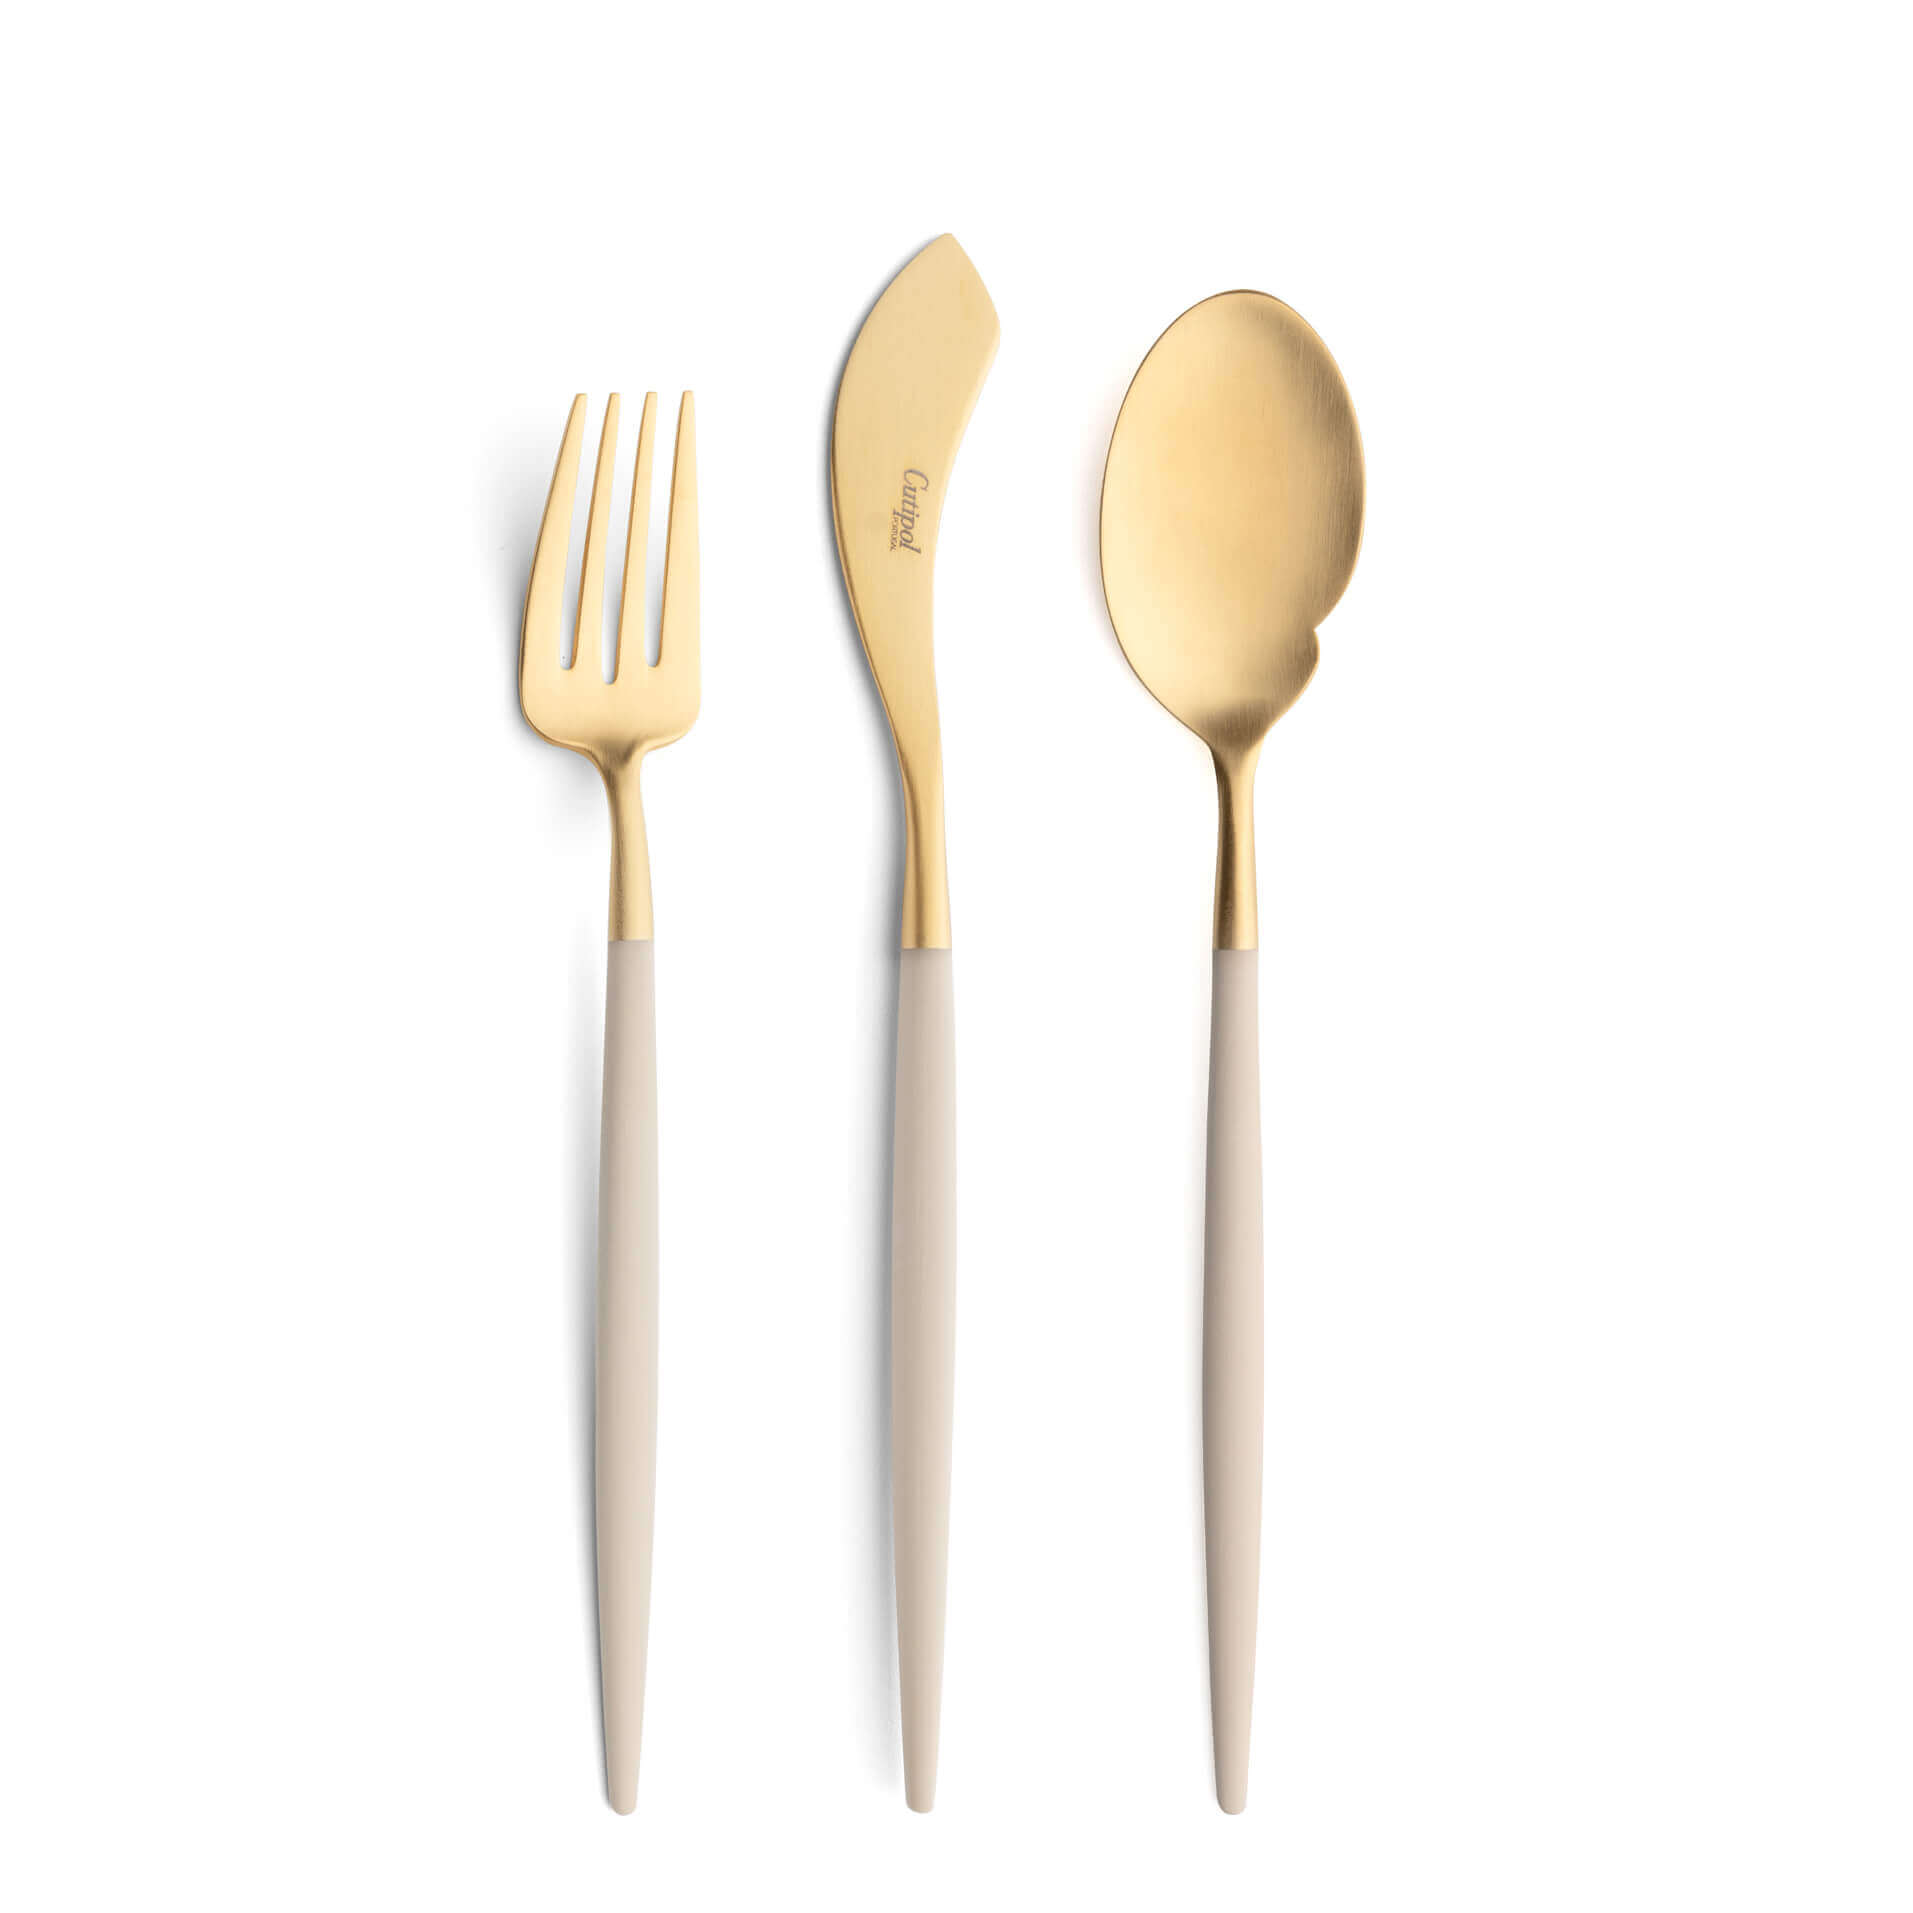 Cutipol Cutlery Goa Ivory Gold with fish fork, fish knife and gourmet spoon